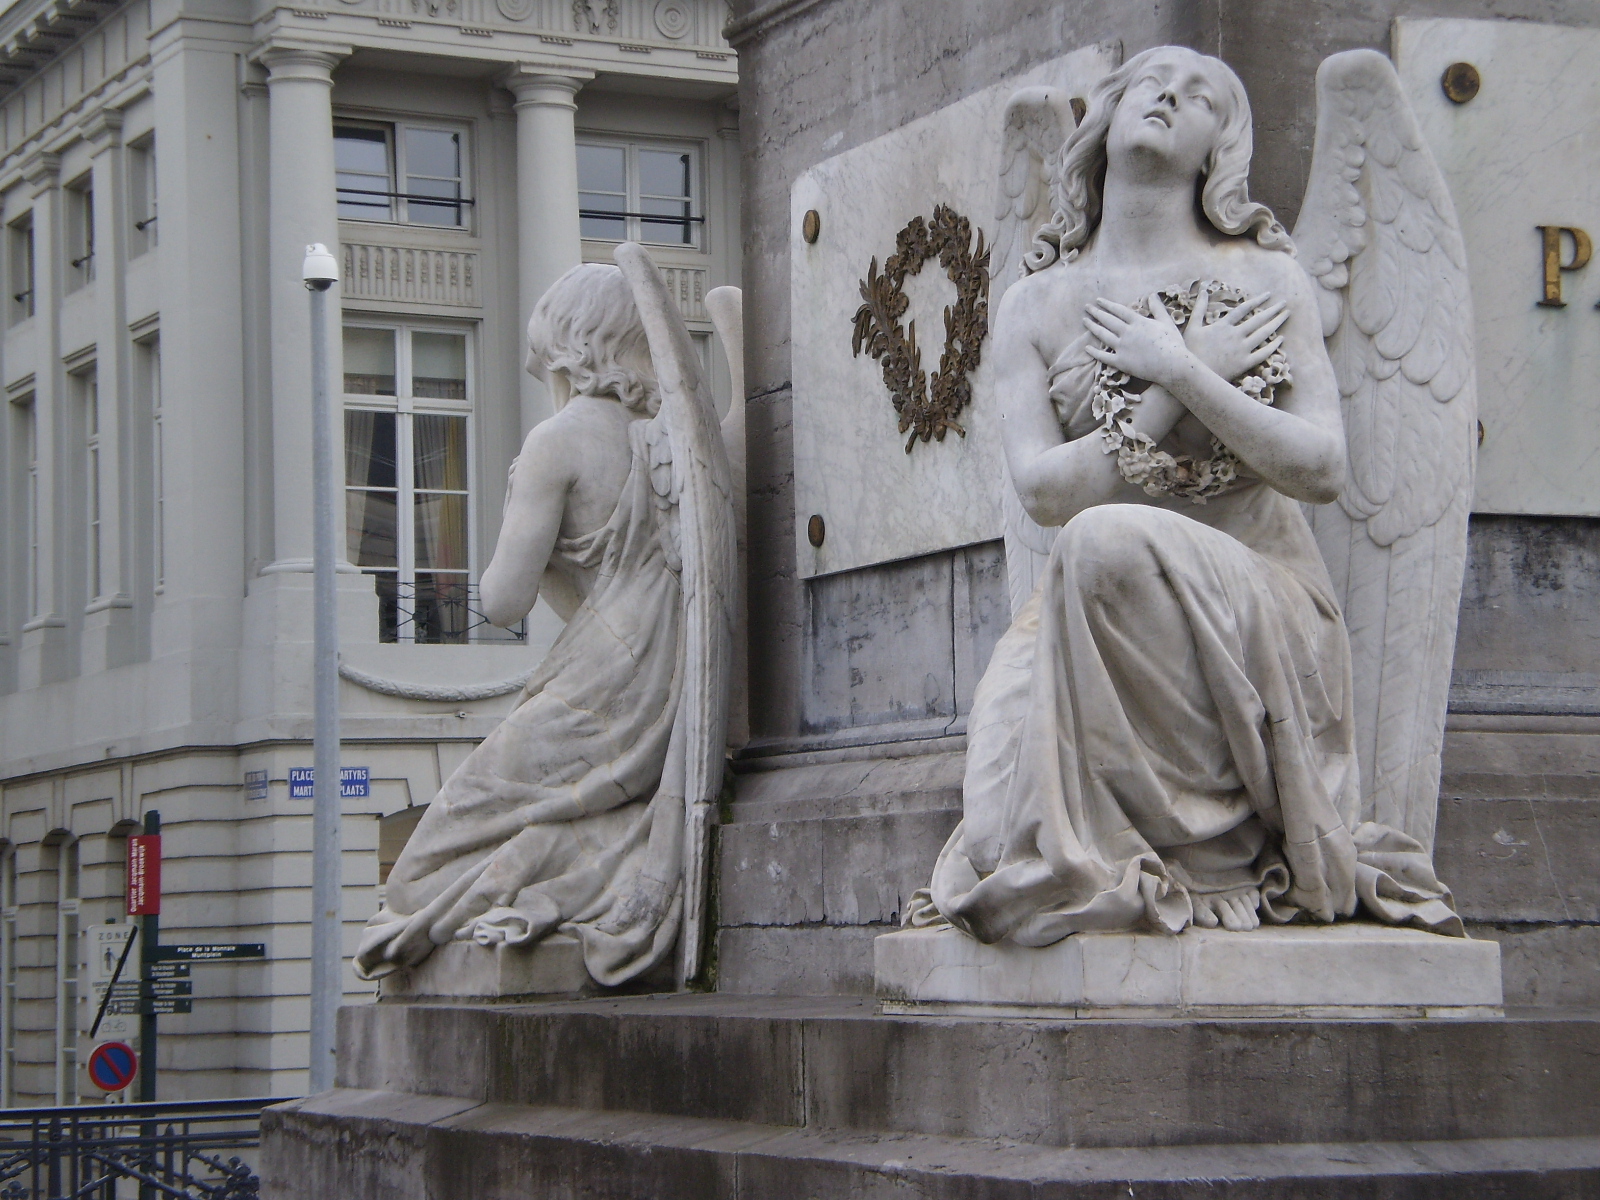 two statues sitting on some stone steps next to a building